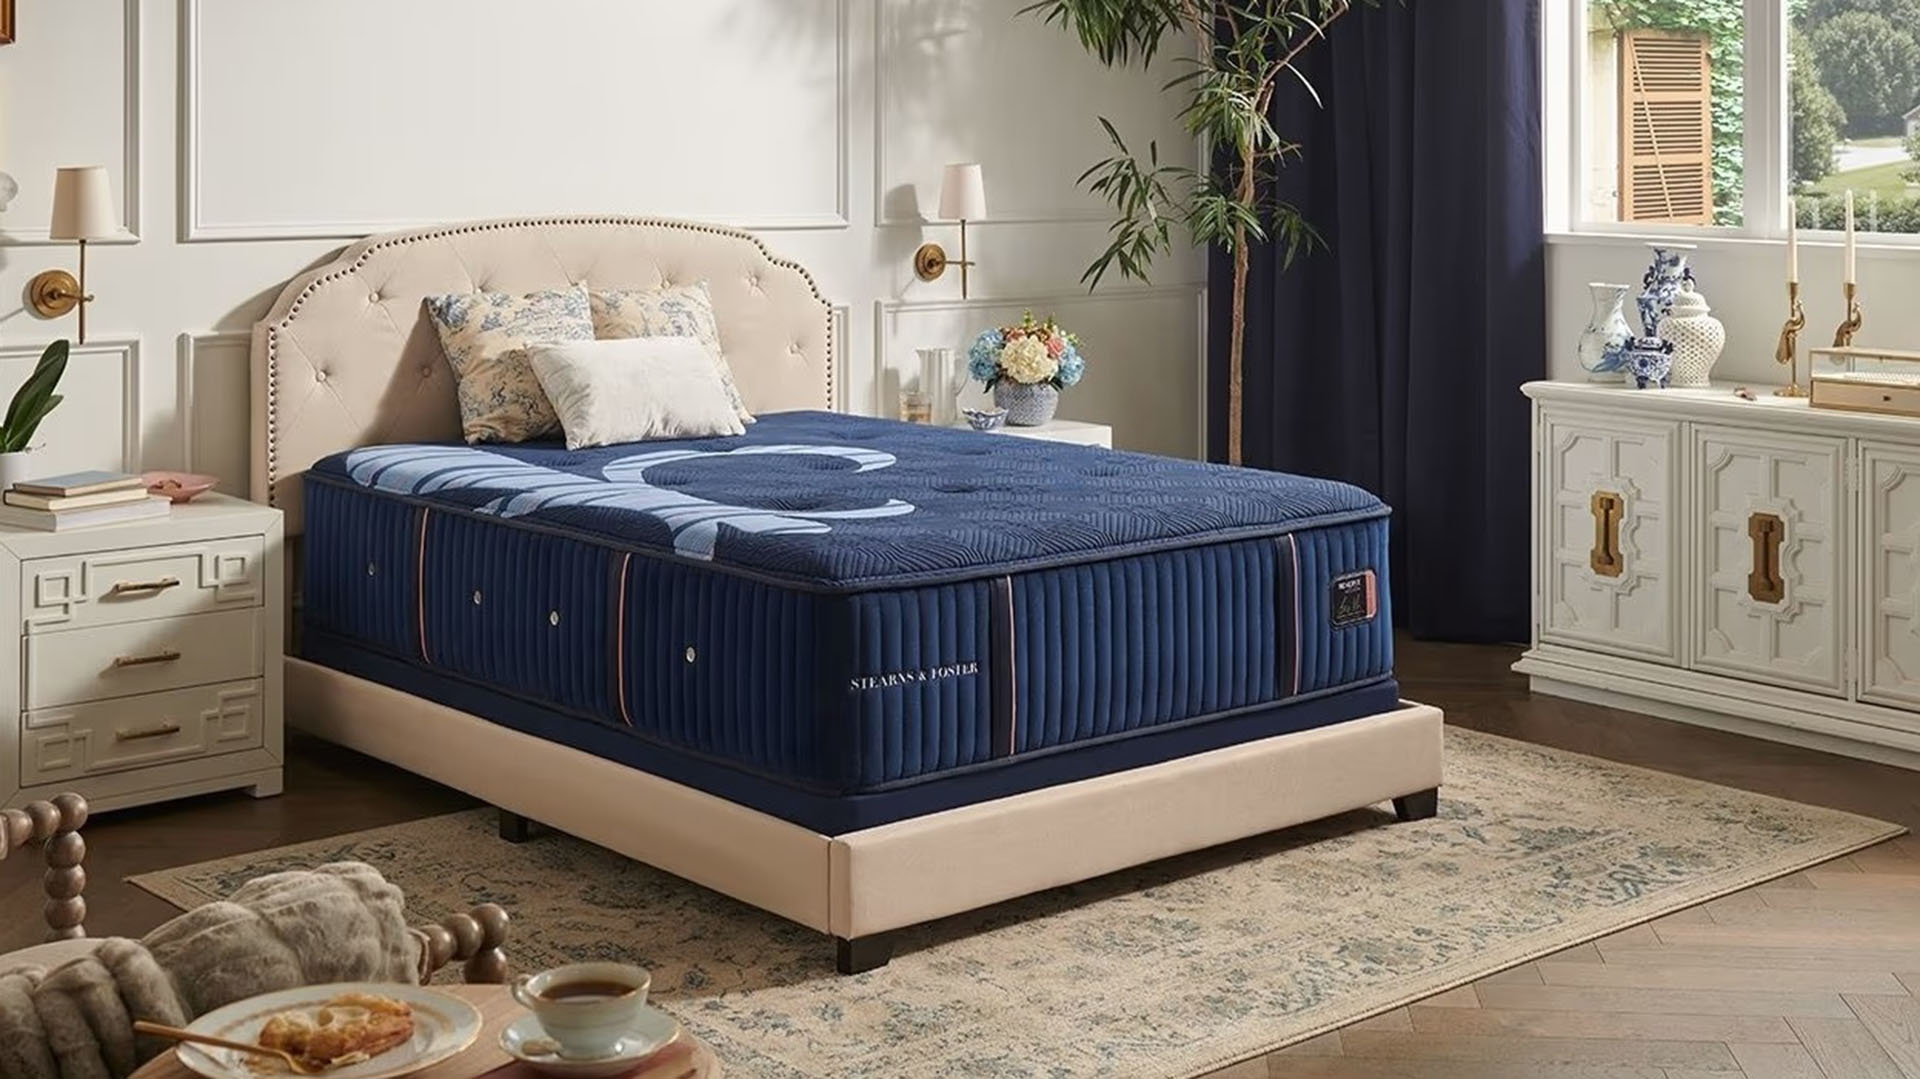 Stearns & Foster mattresses in Alameda are designed with comfort and support in mind.